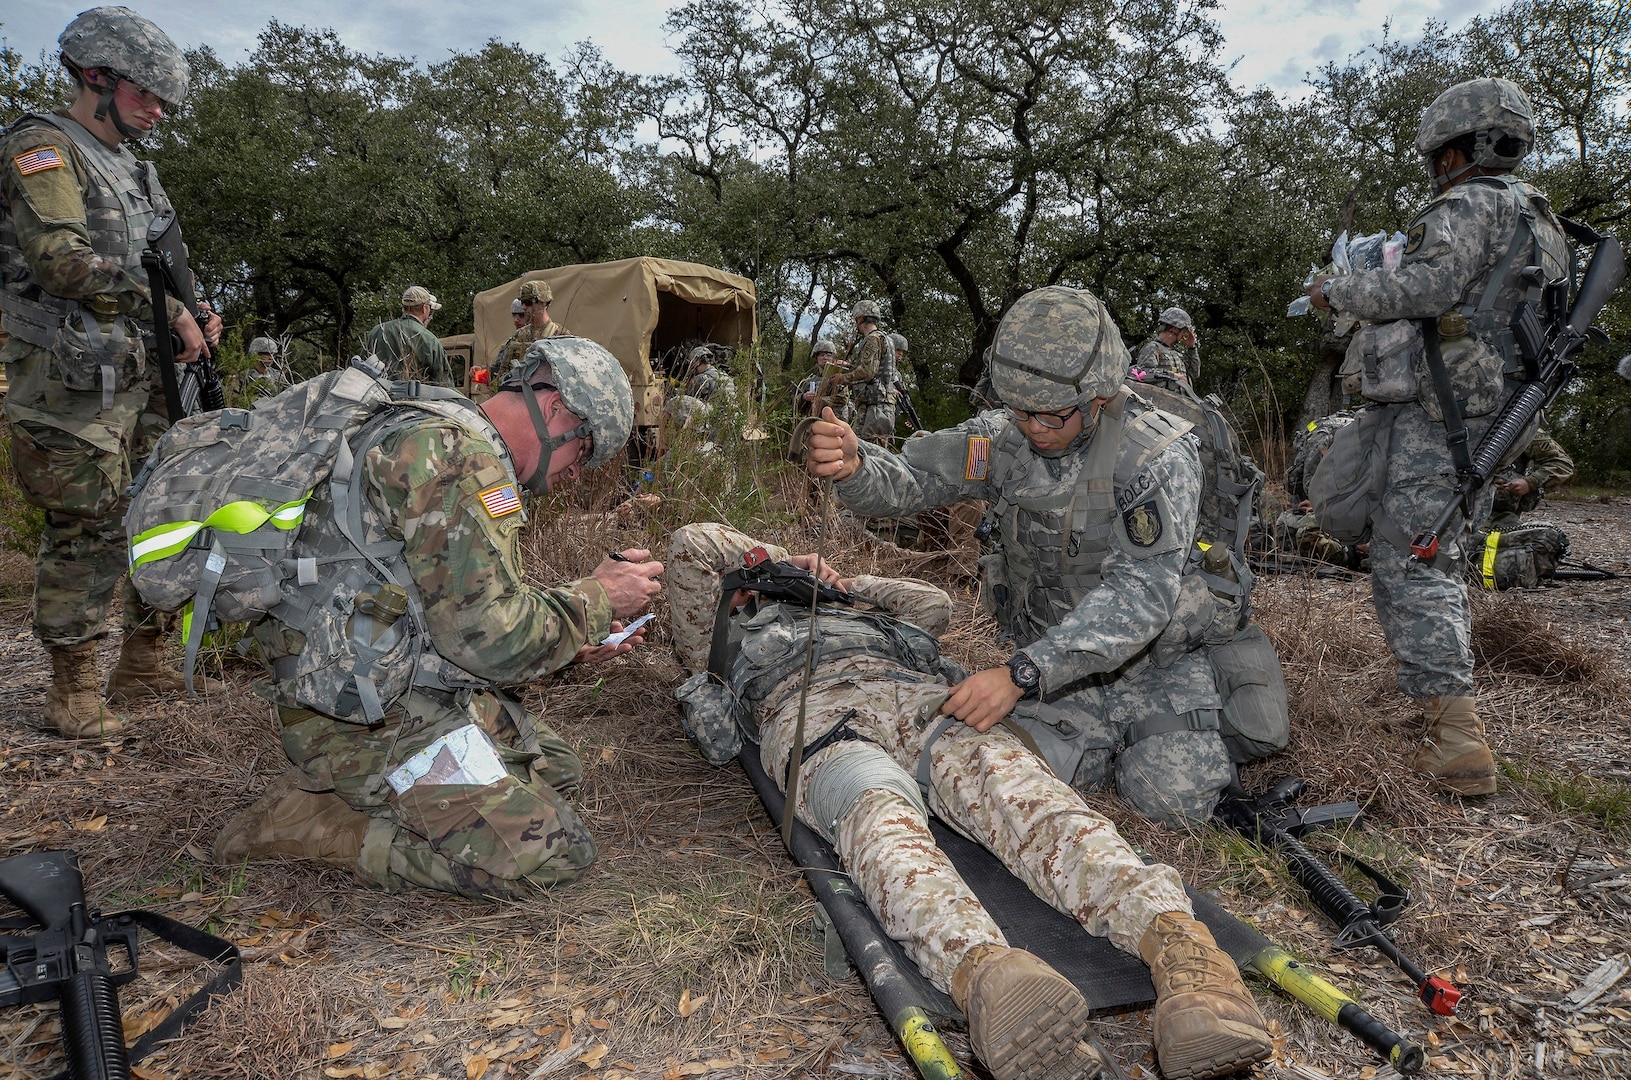 Course teaches medical officers about Army tasks and leadership > Joint